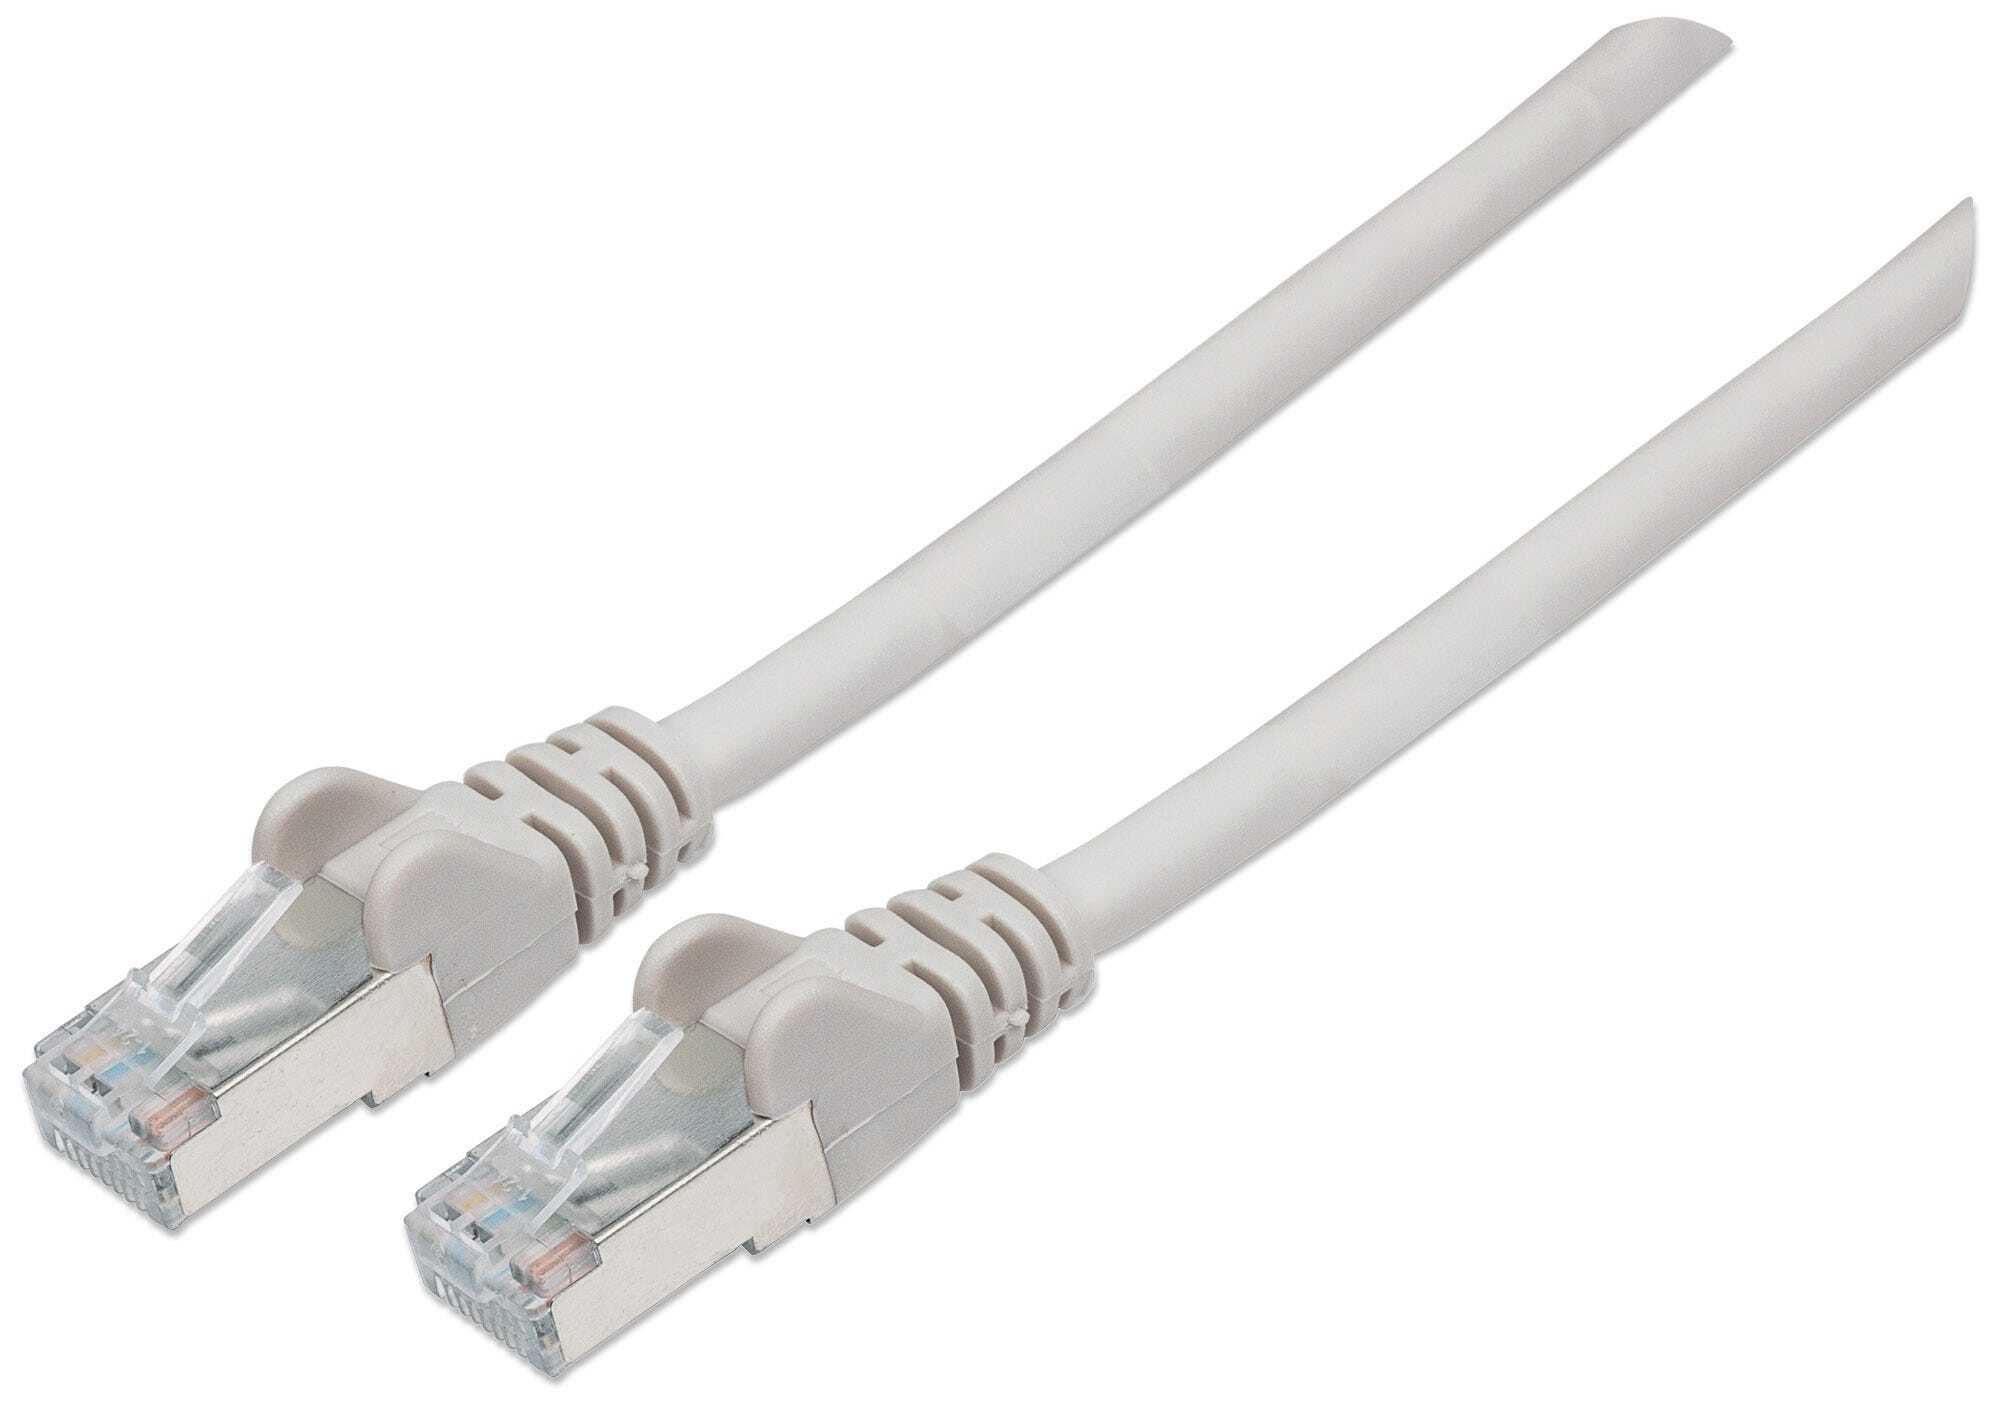 Intellinet Network Patch Cable, Cat6, 2m, Grey, Copper, S/FTP, LSOH / LSZH, PVC, Gold Plated Contacts, Snagless, Booted, Polybag